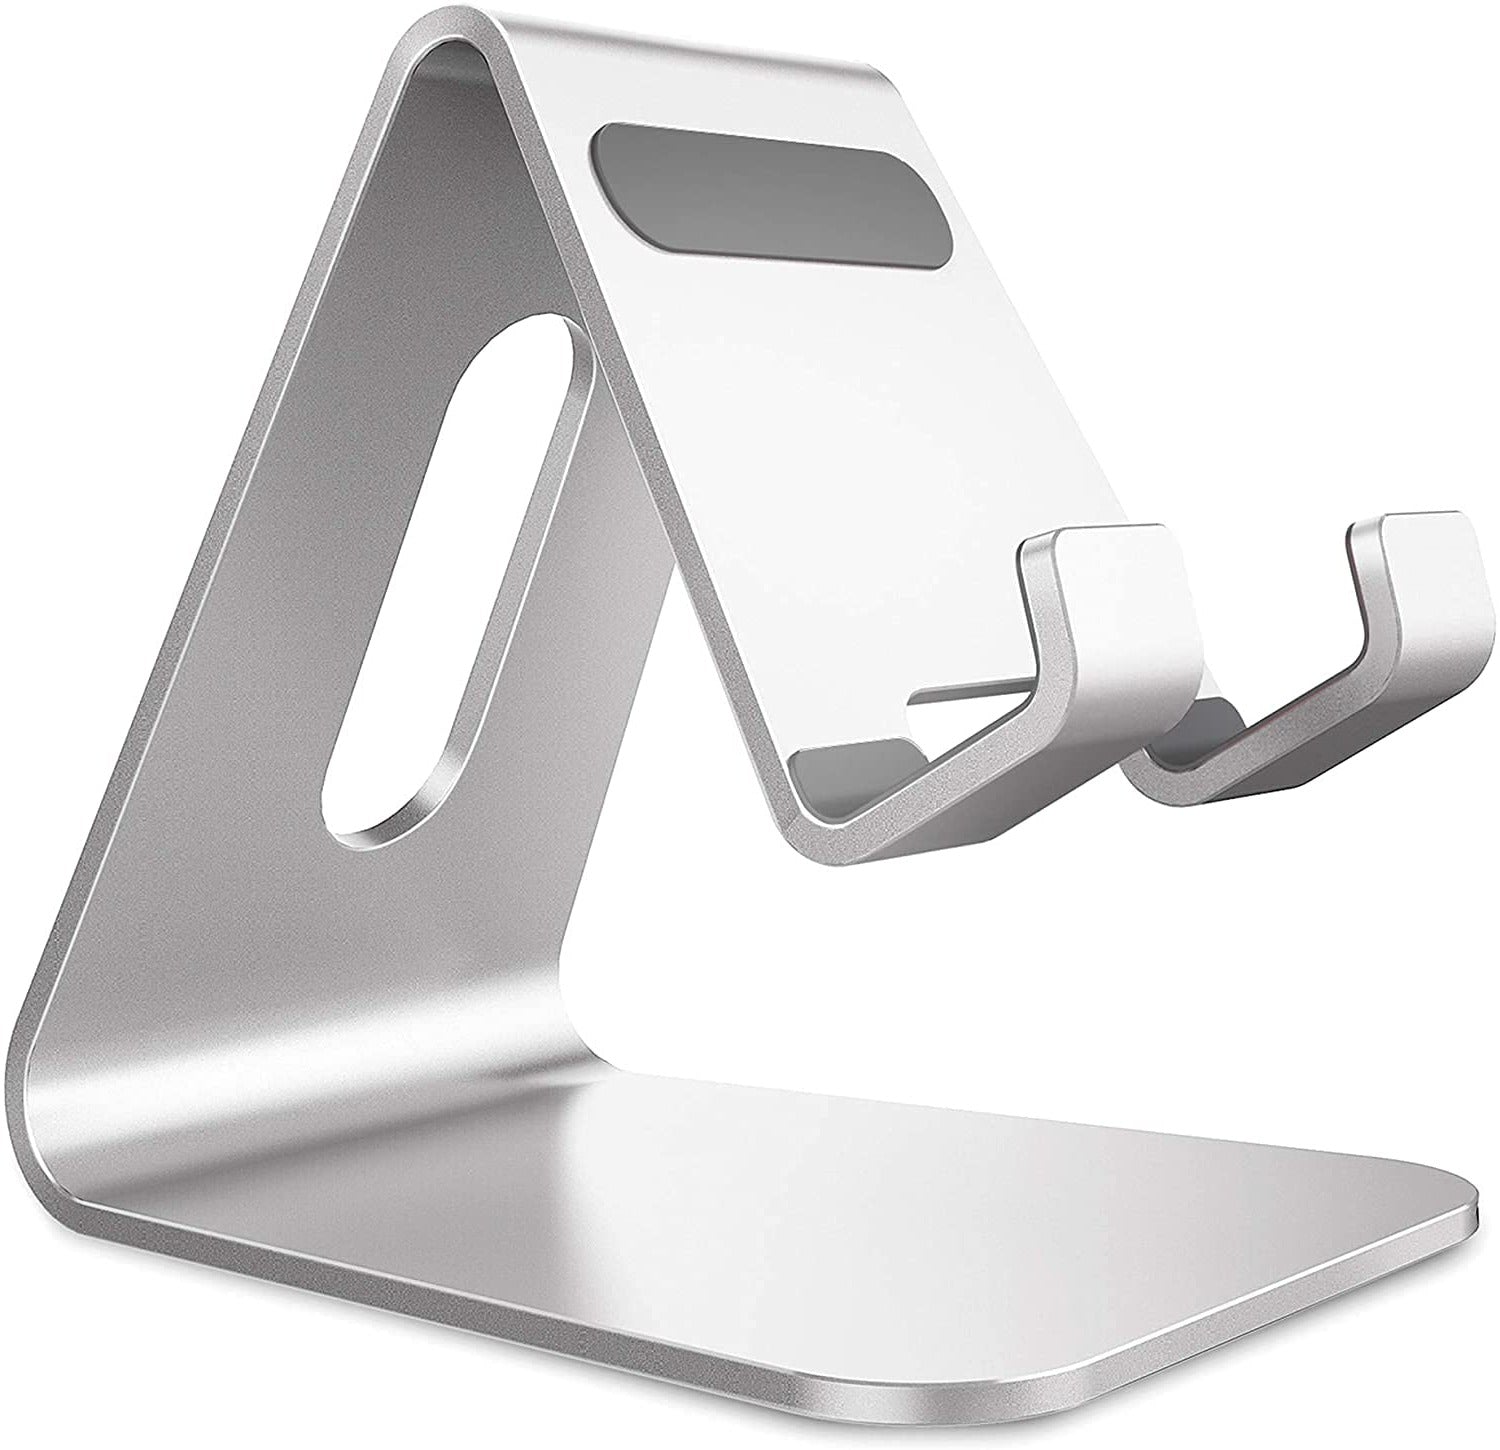 THRIVE Cell Phone Stand, Cradle, Holder,Aluminum Desktop Stand